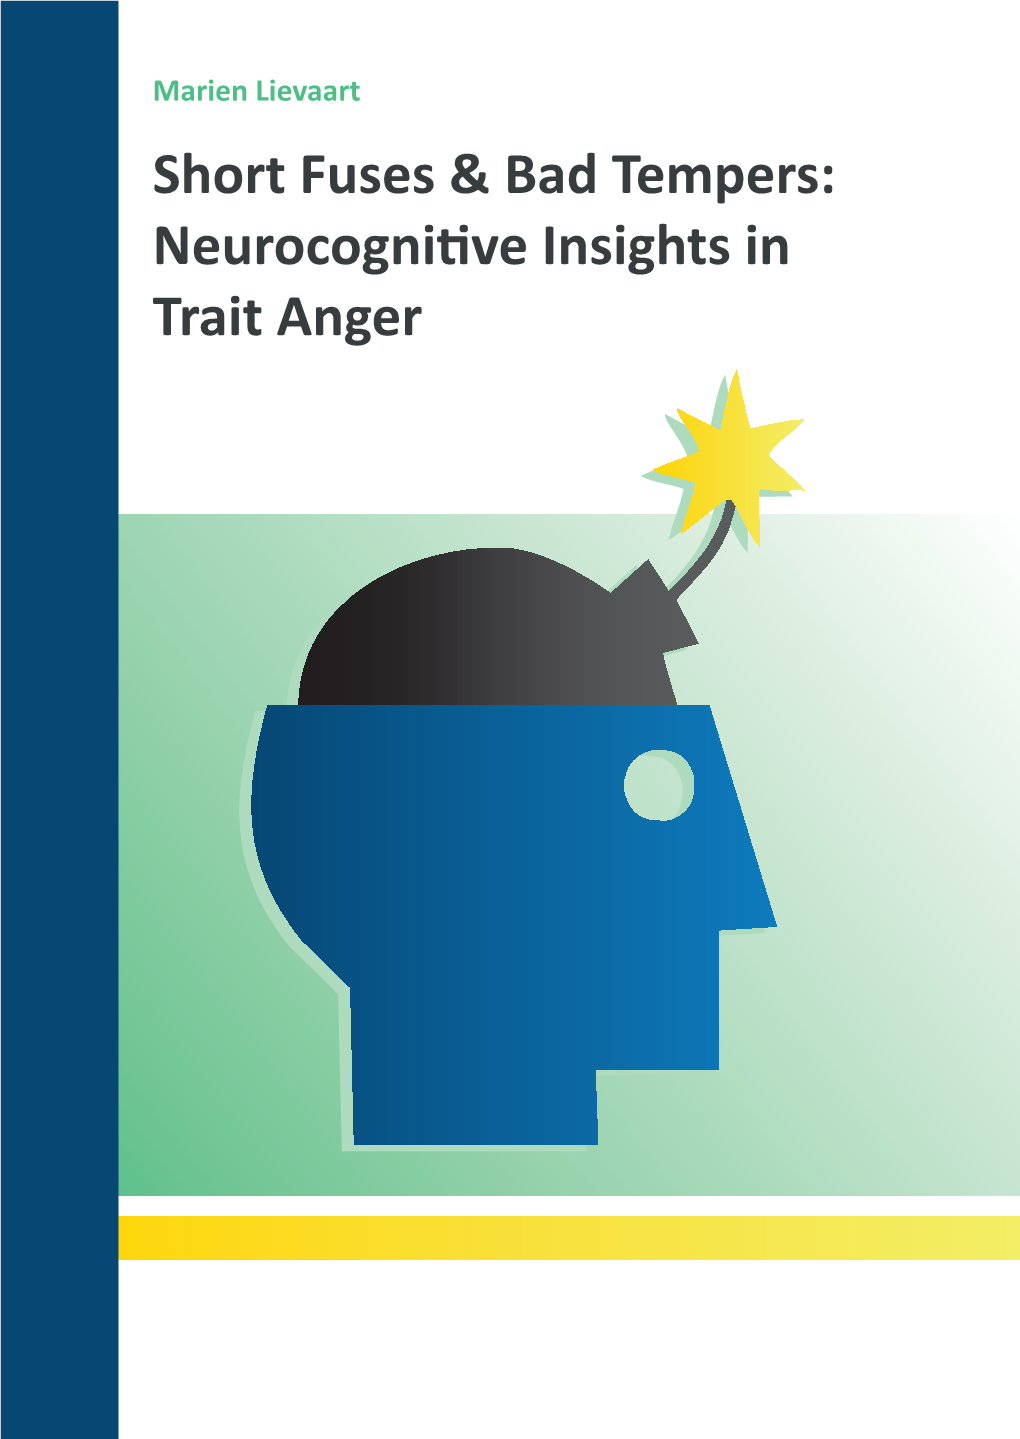 Short Fuses & Bad Tempers: Neurocognitive Insights in Trait Anger